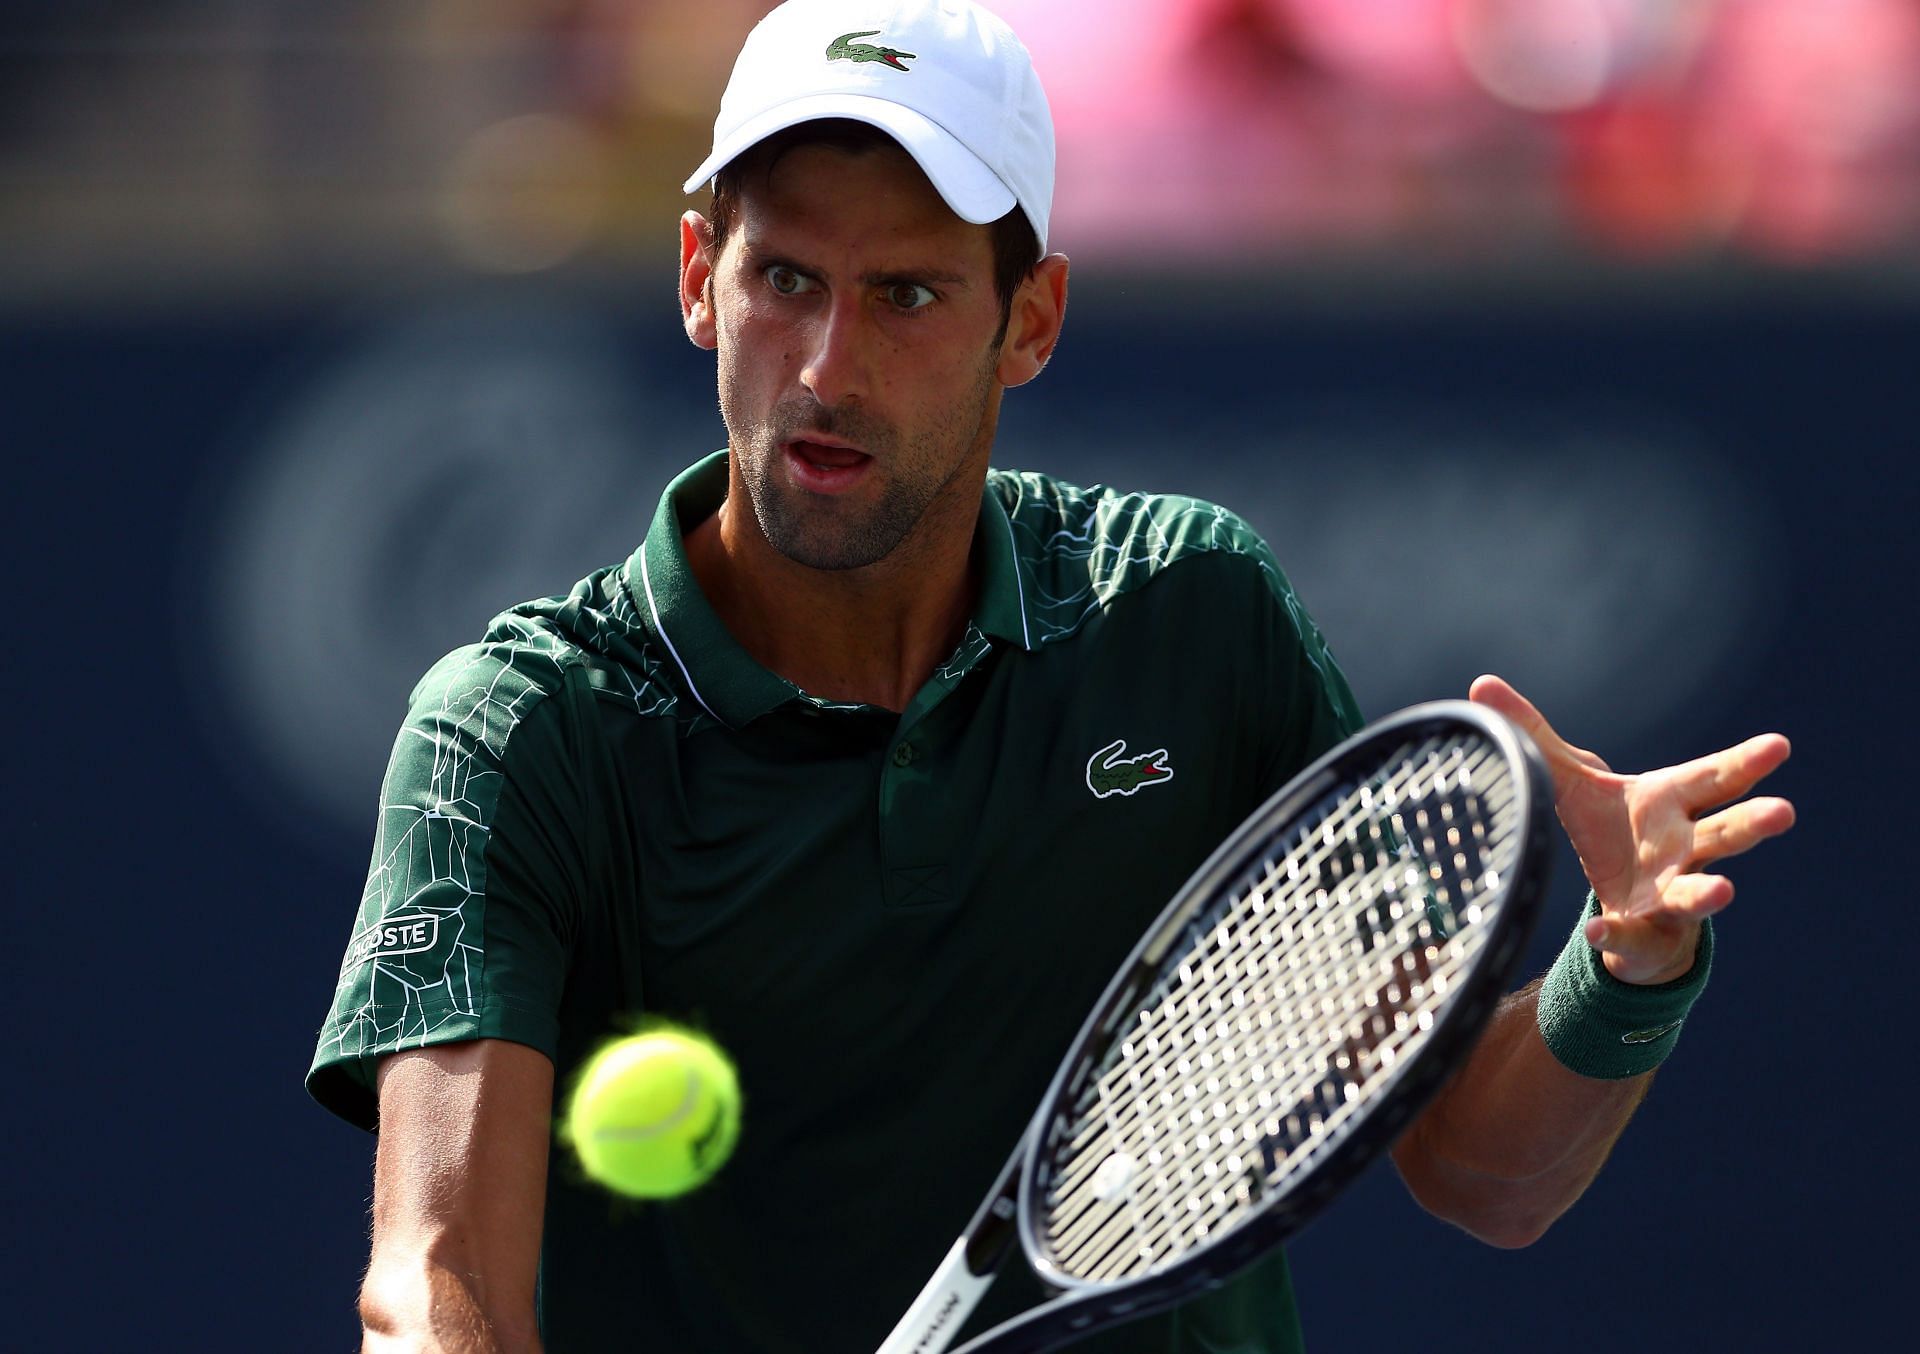 Novak Djokovic in action during the 2019 Rogers Cup